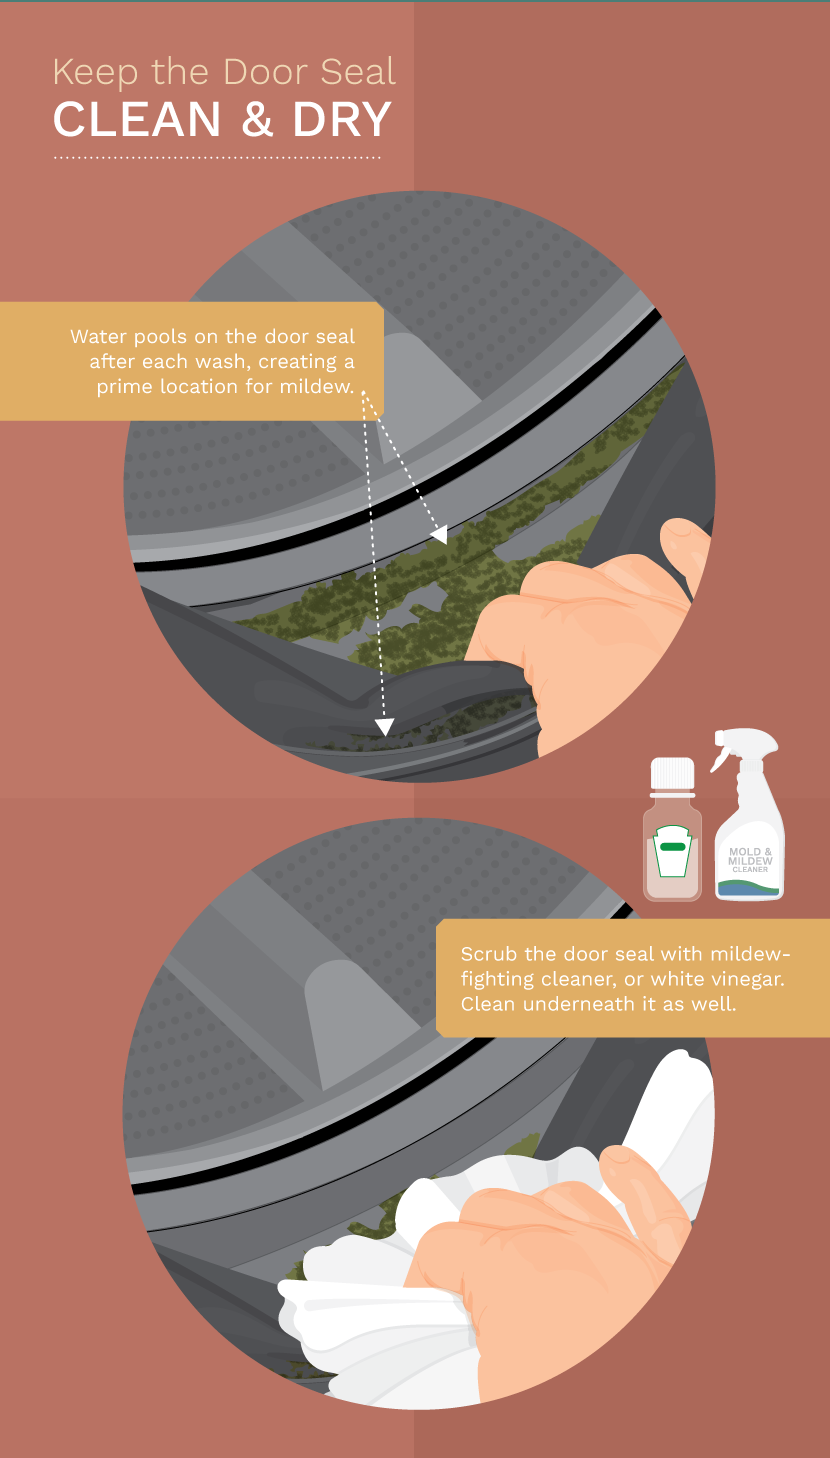 HOW TO CLEAN YOUR FRONT LOAD WASHING MACHINE